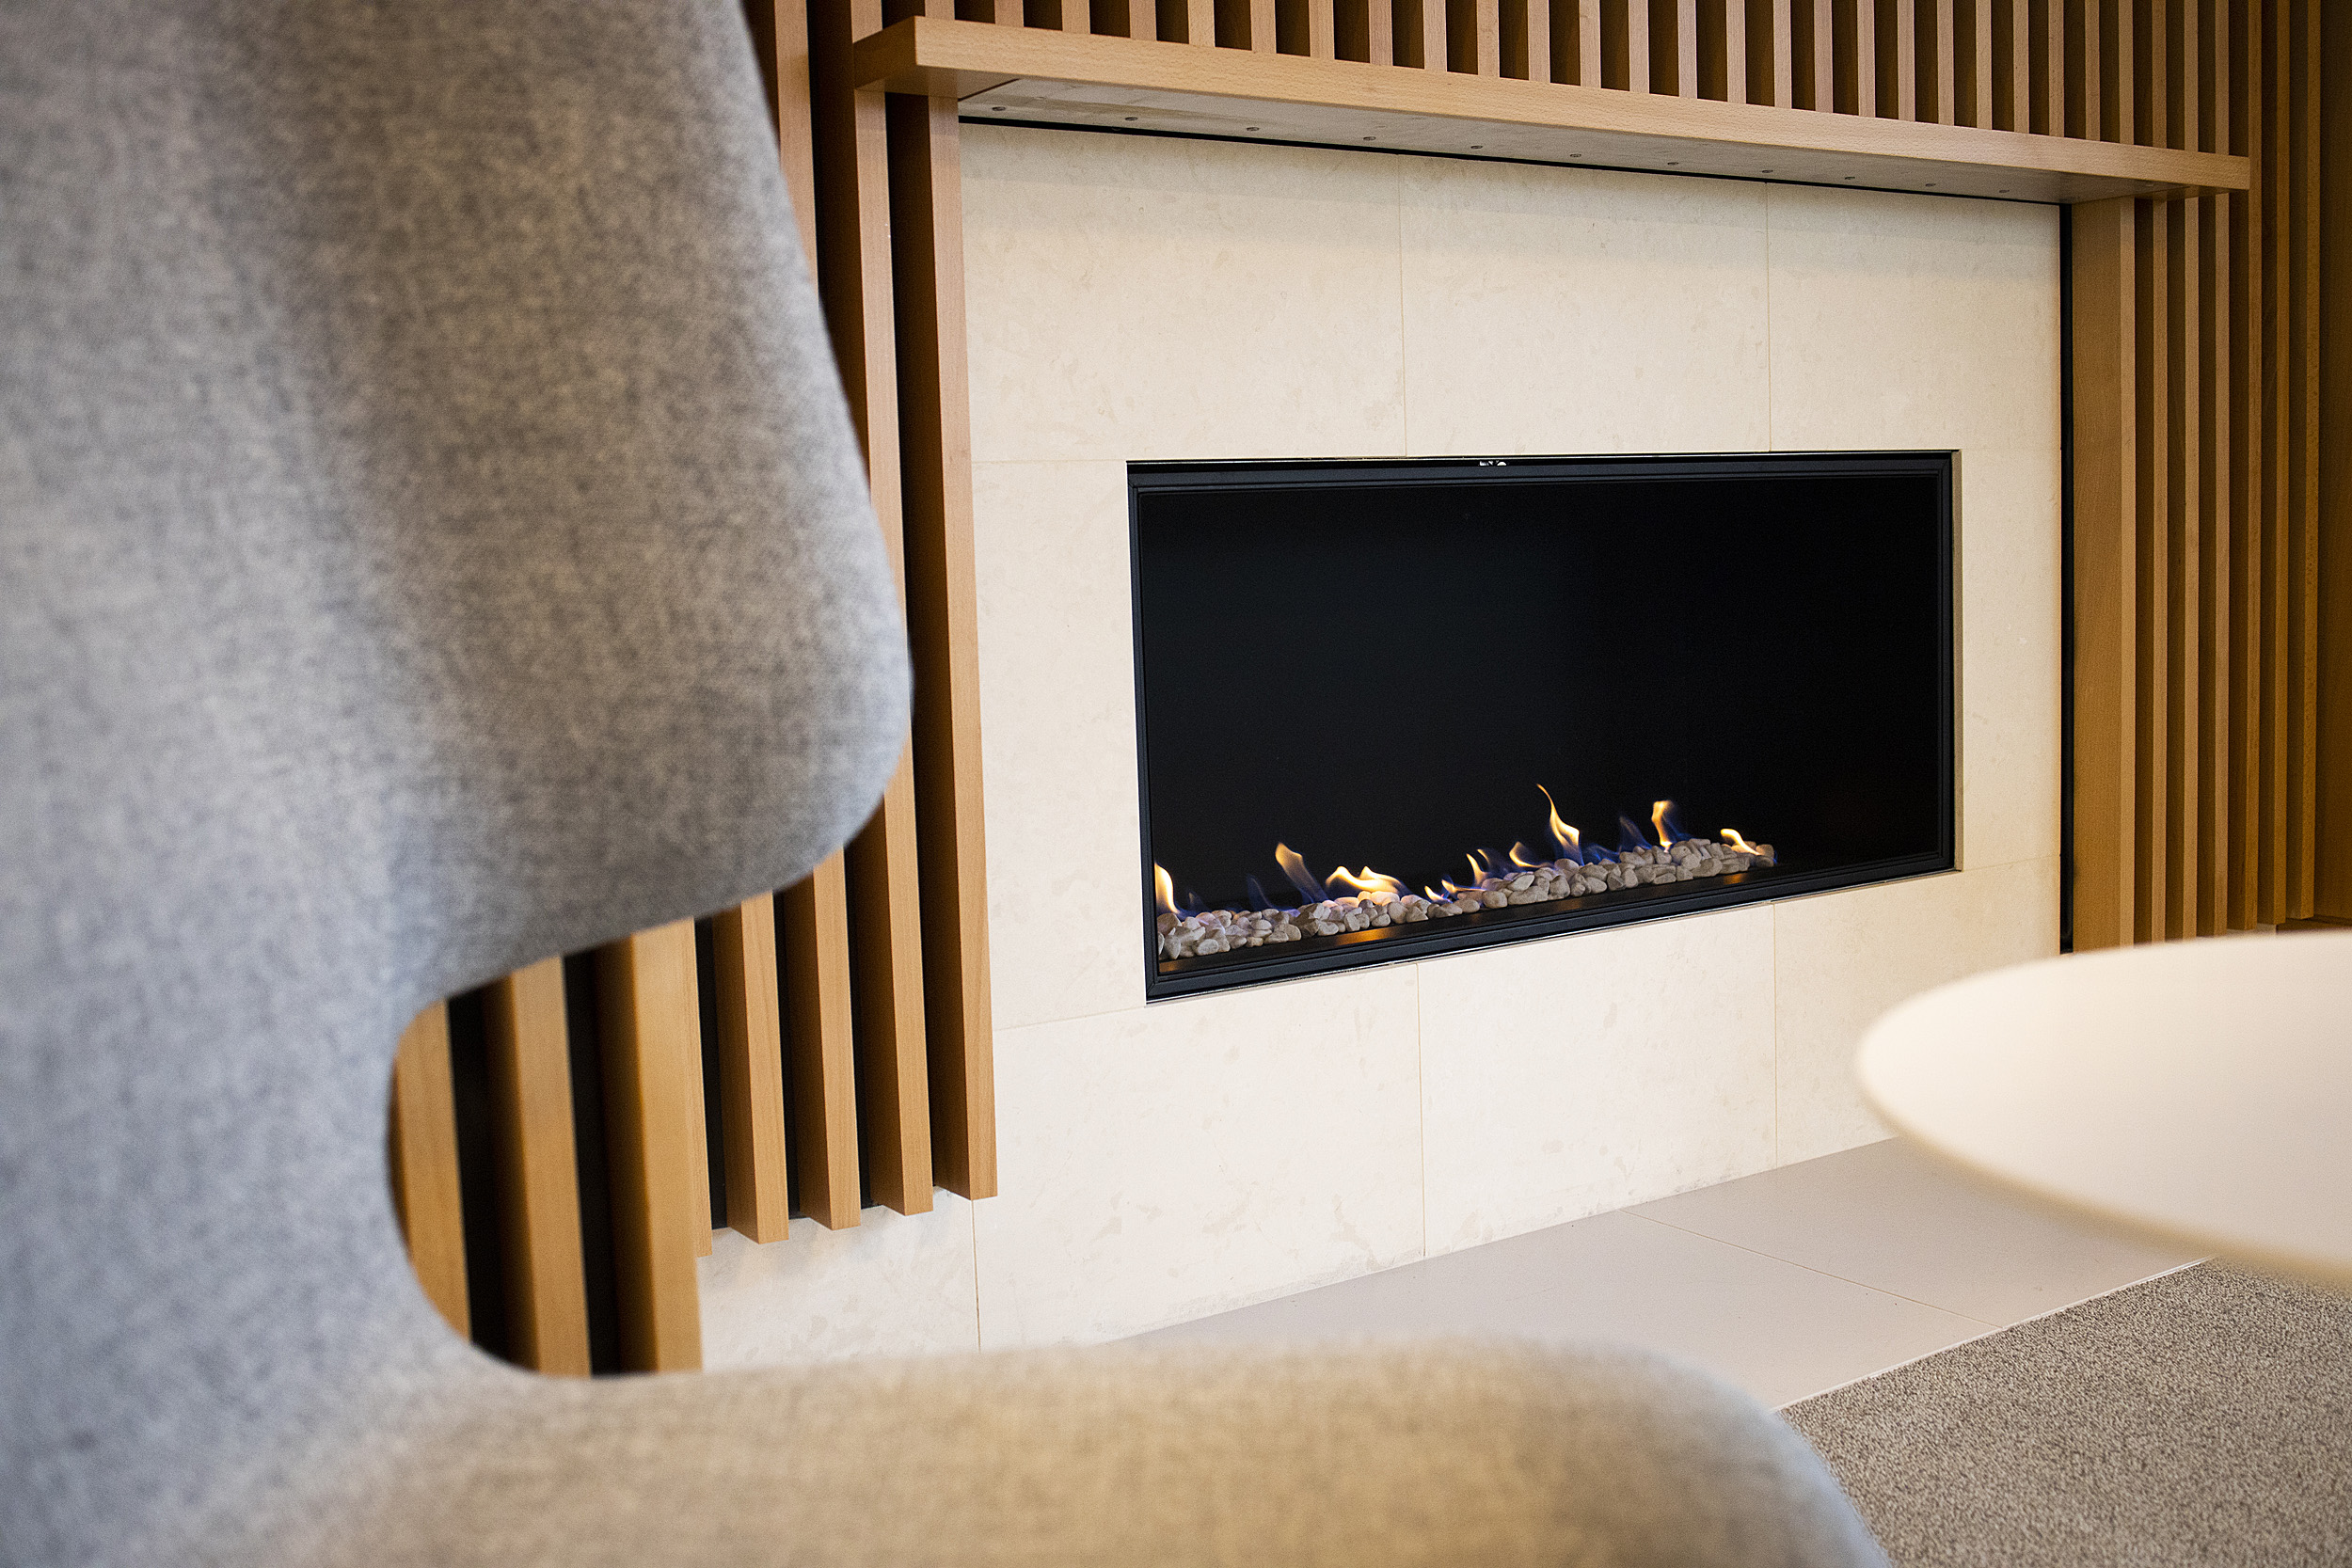 A modern gas fireplace at the Smith Campus Center.